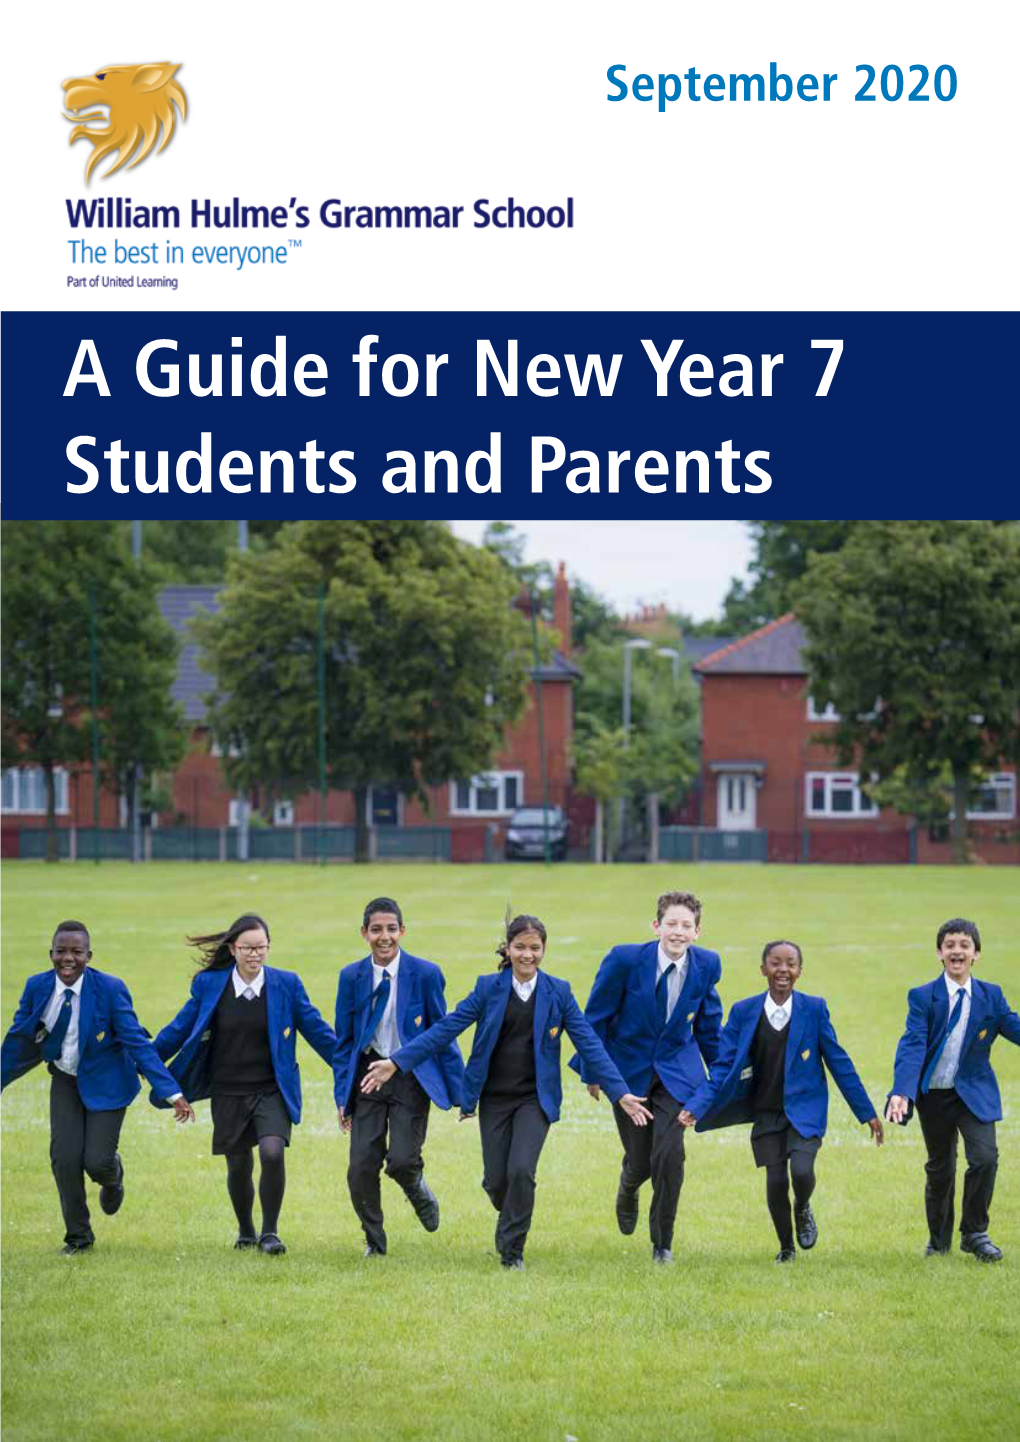 A Guide for New Year 7 Students and Parents